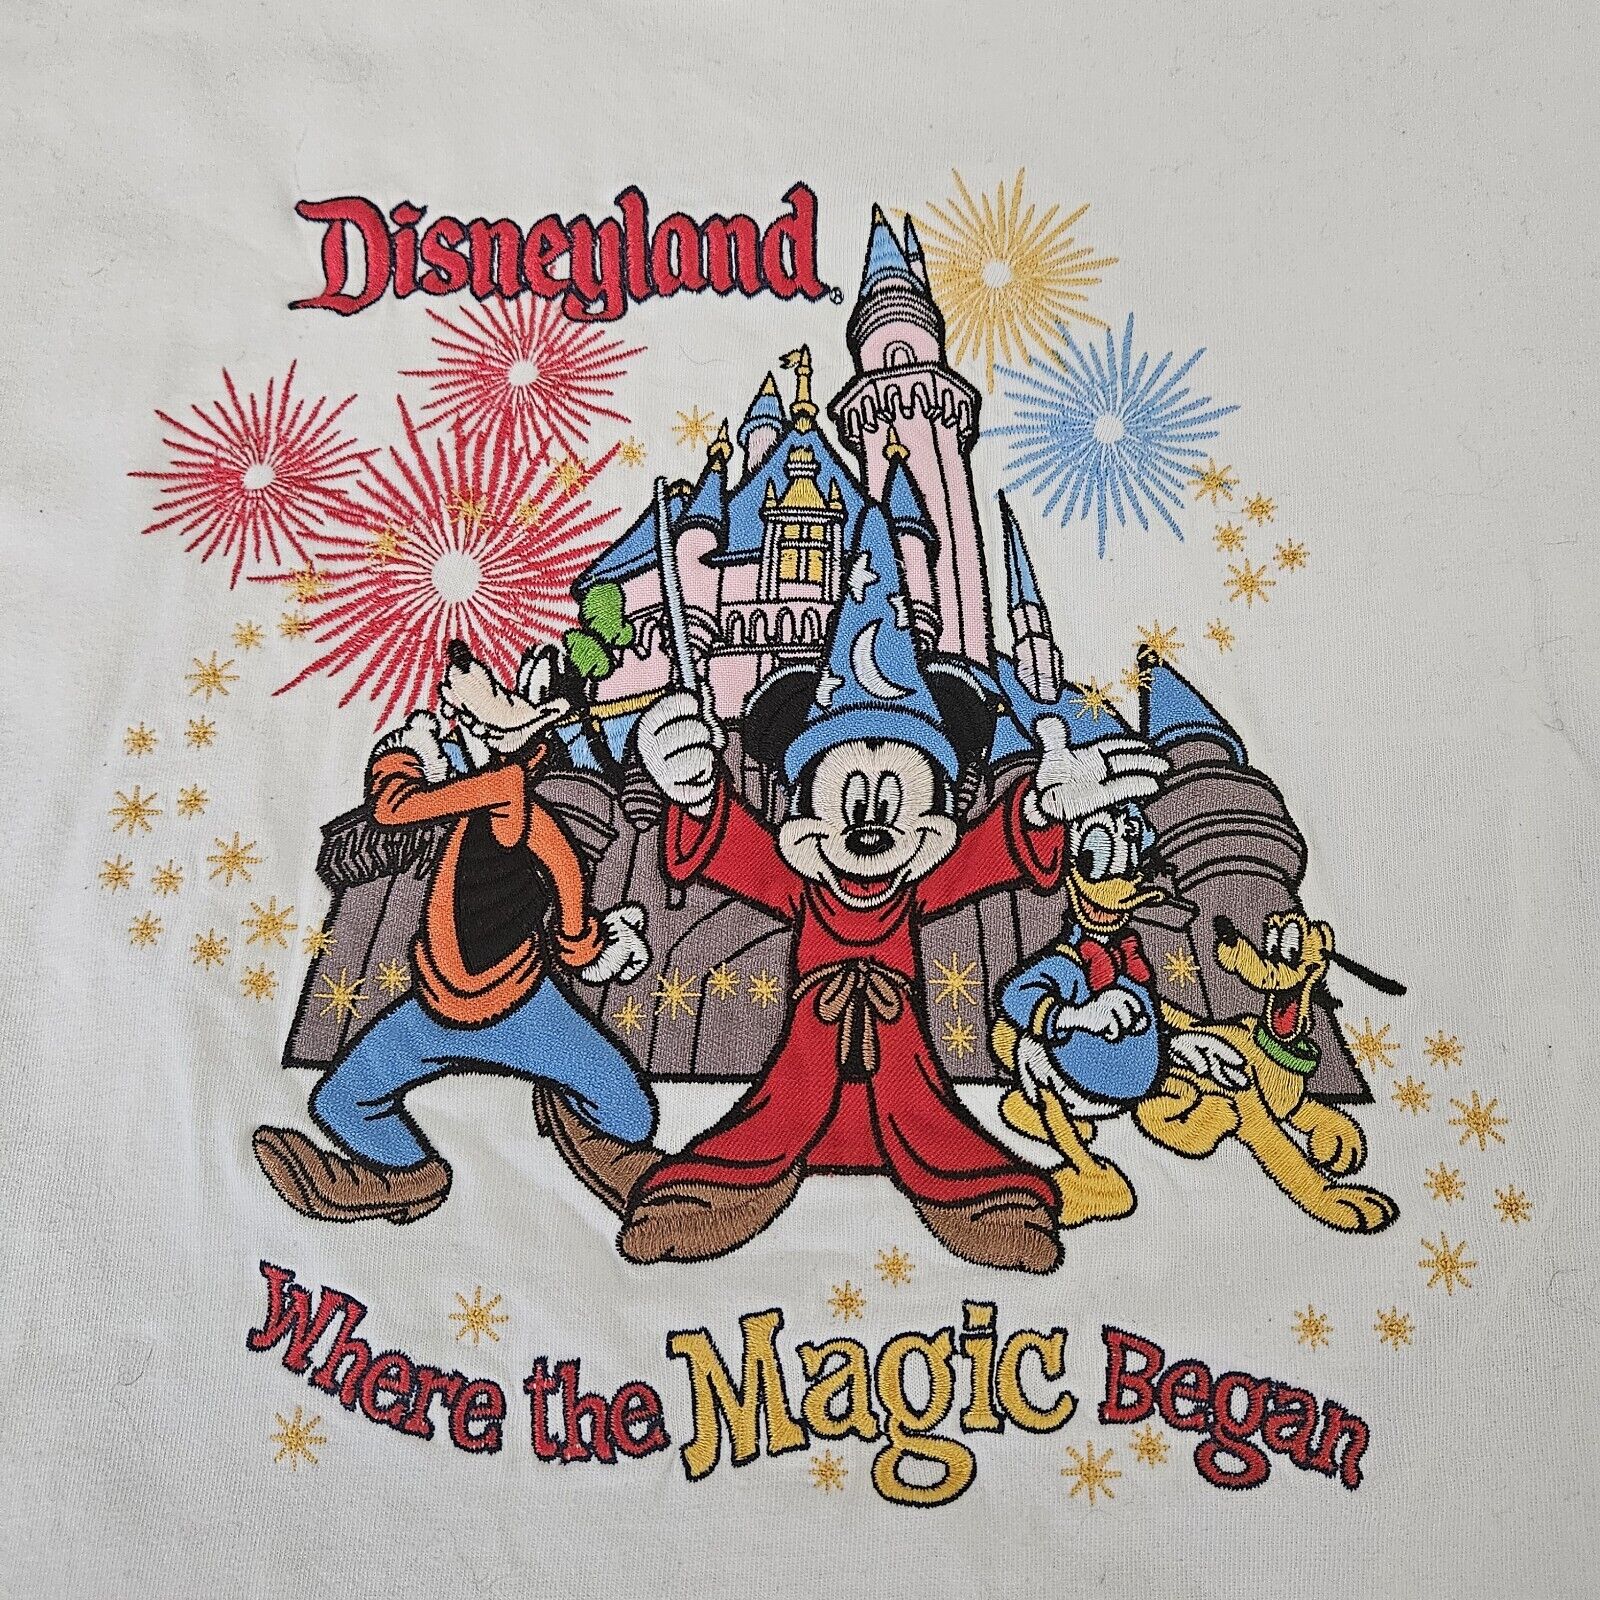 Disneyland Where The Magic Began White Embroidered Shirt Adult Size Large